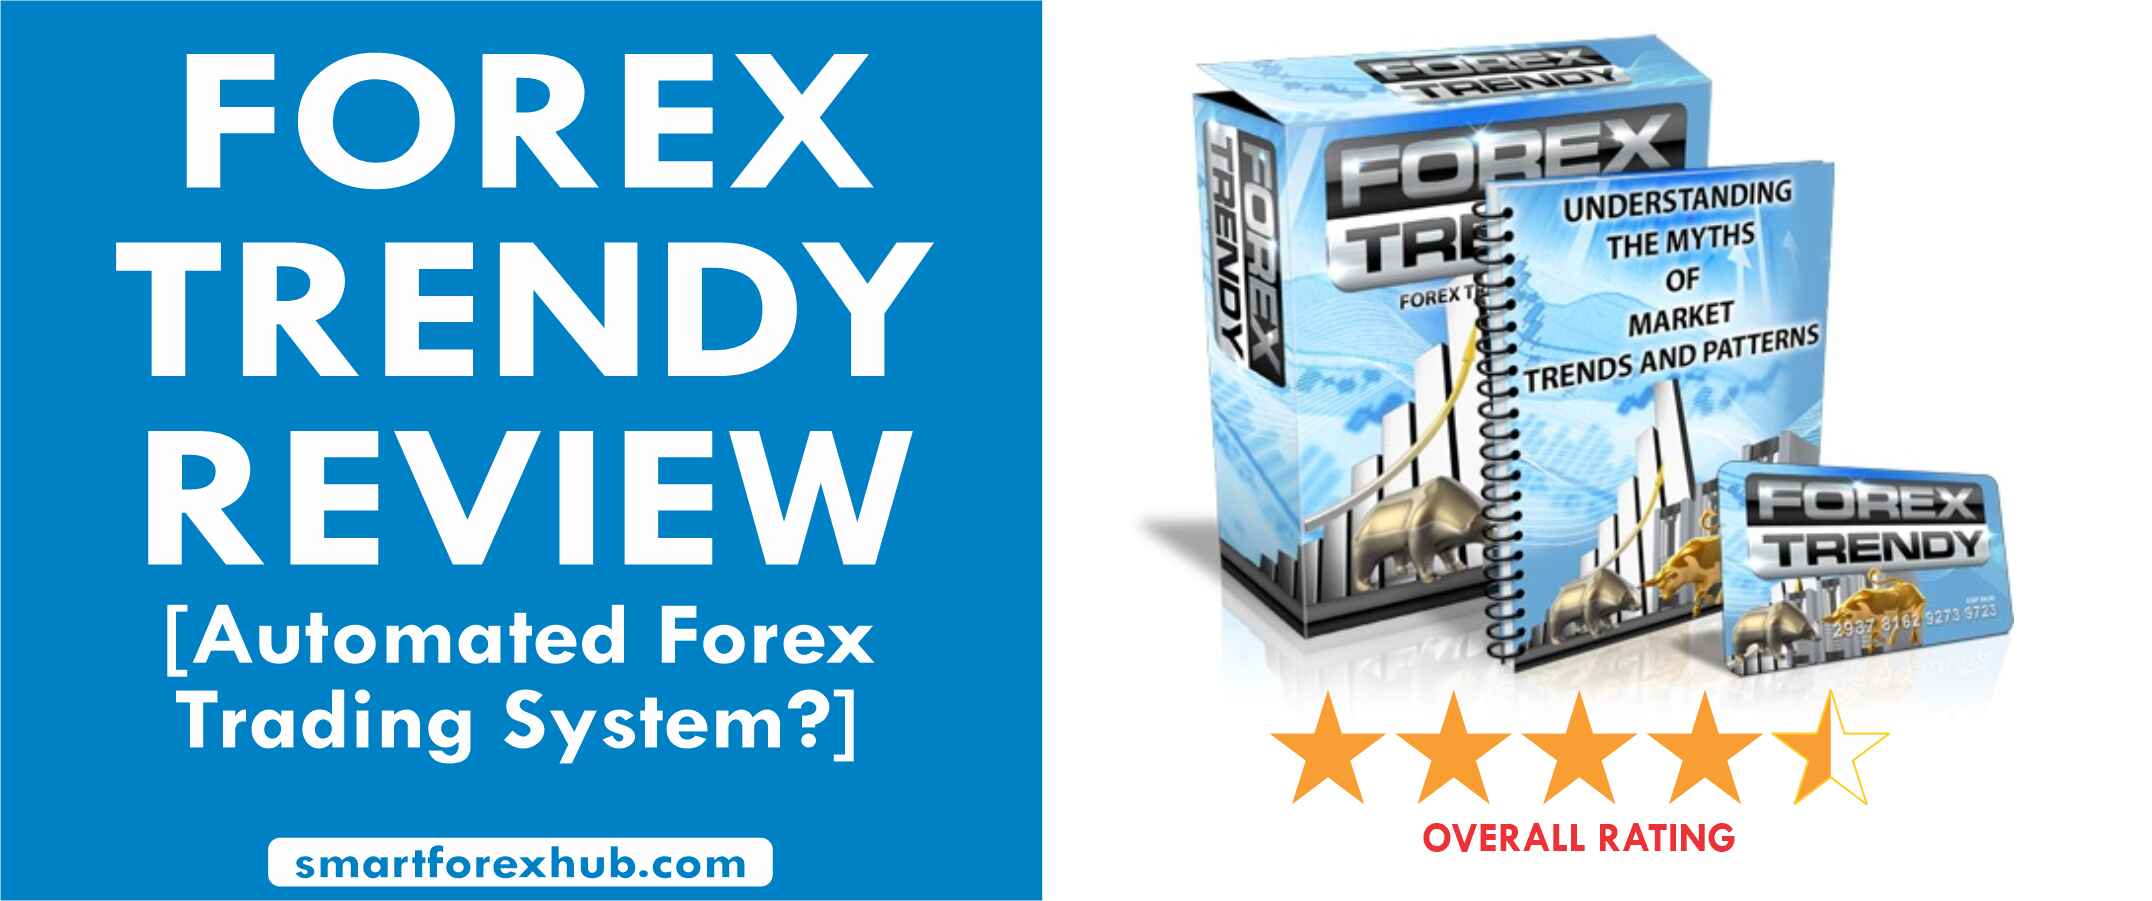 Forex Trending Review featured image